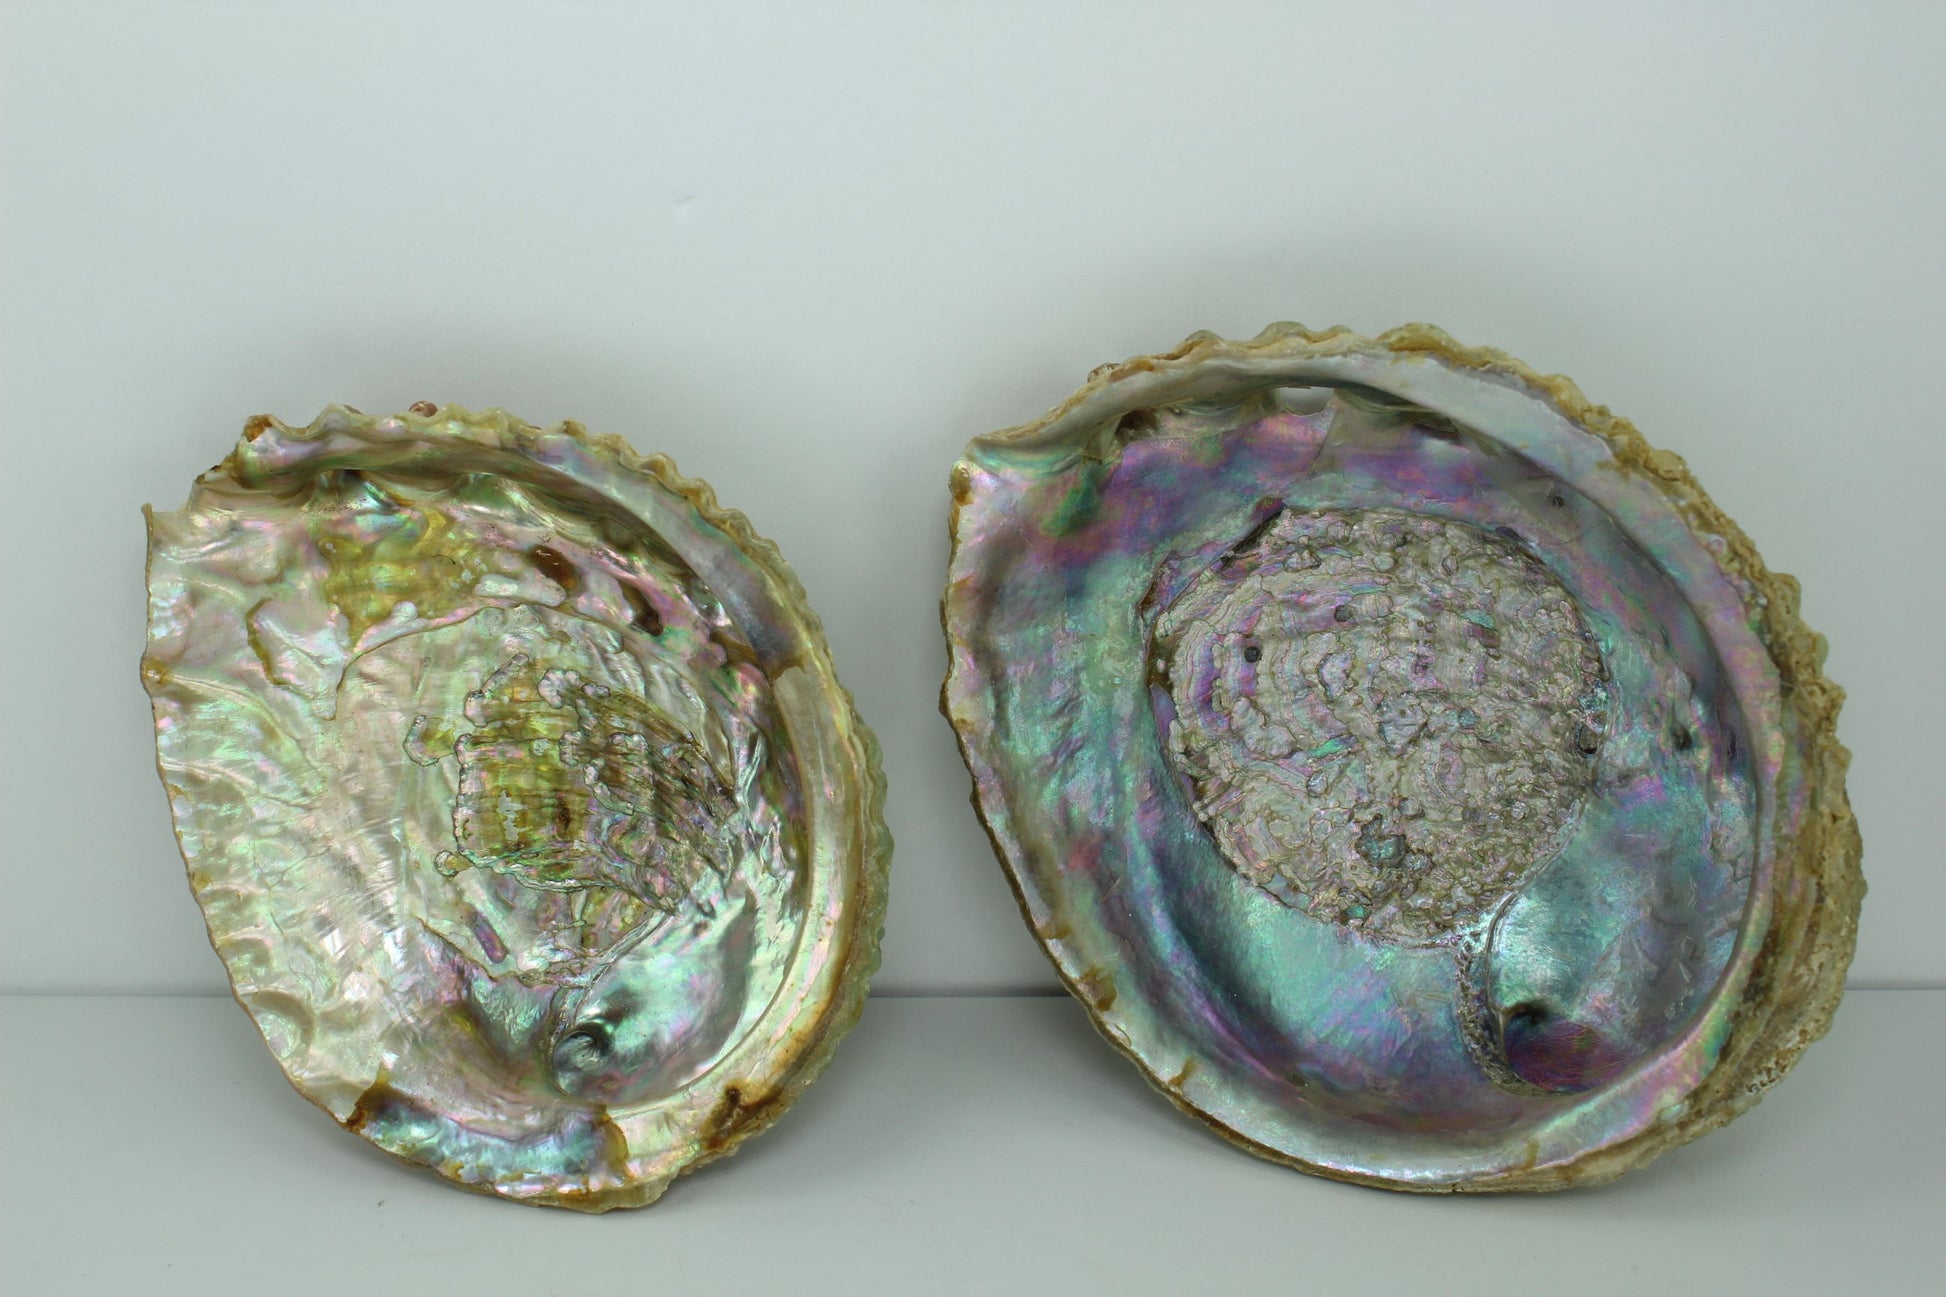 Green Abalone Shells 2 Vintage Rainbow Iridescent  5 1/2" 4 3/4" Estate Collection Shell Art Collectibles